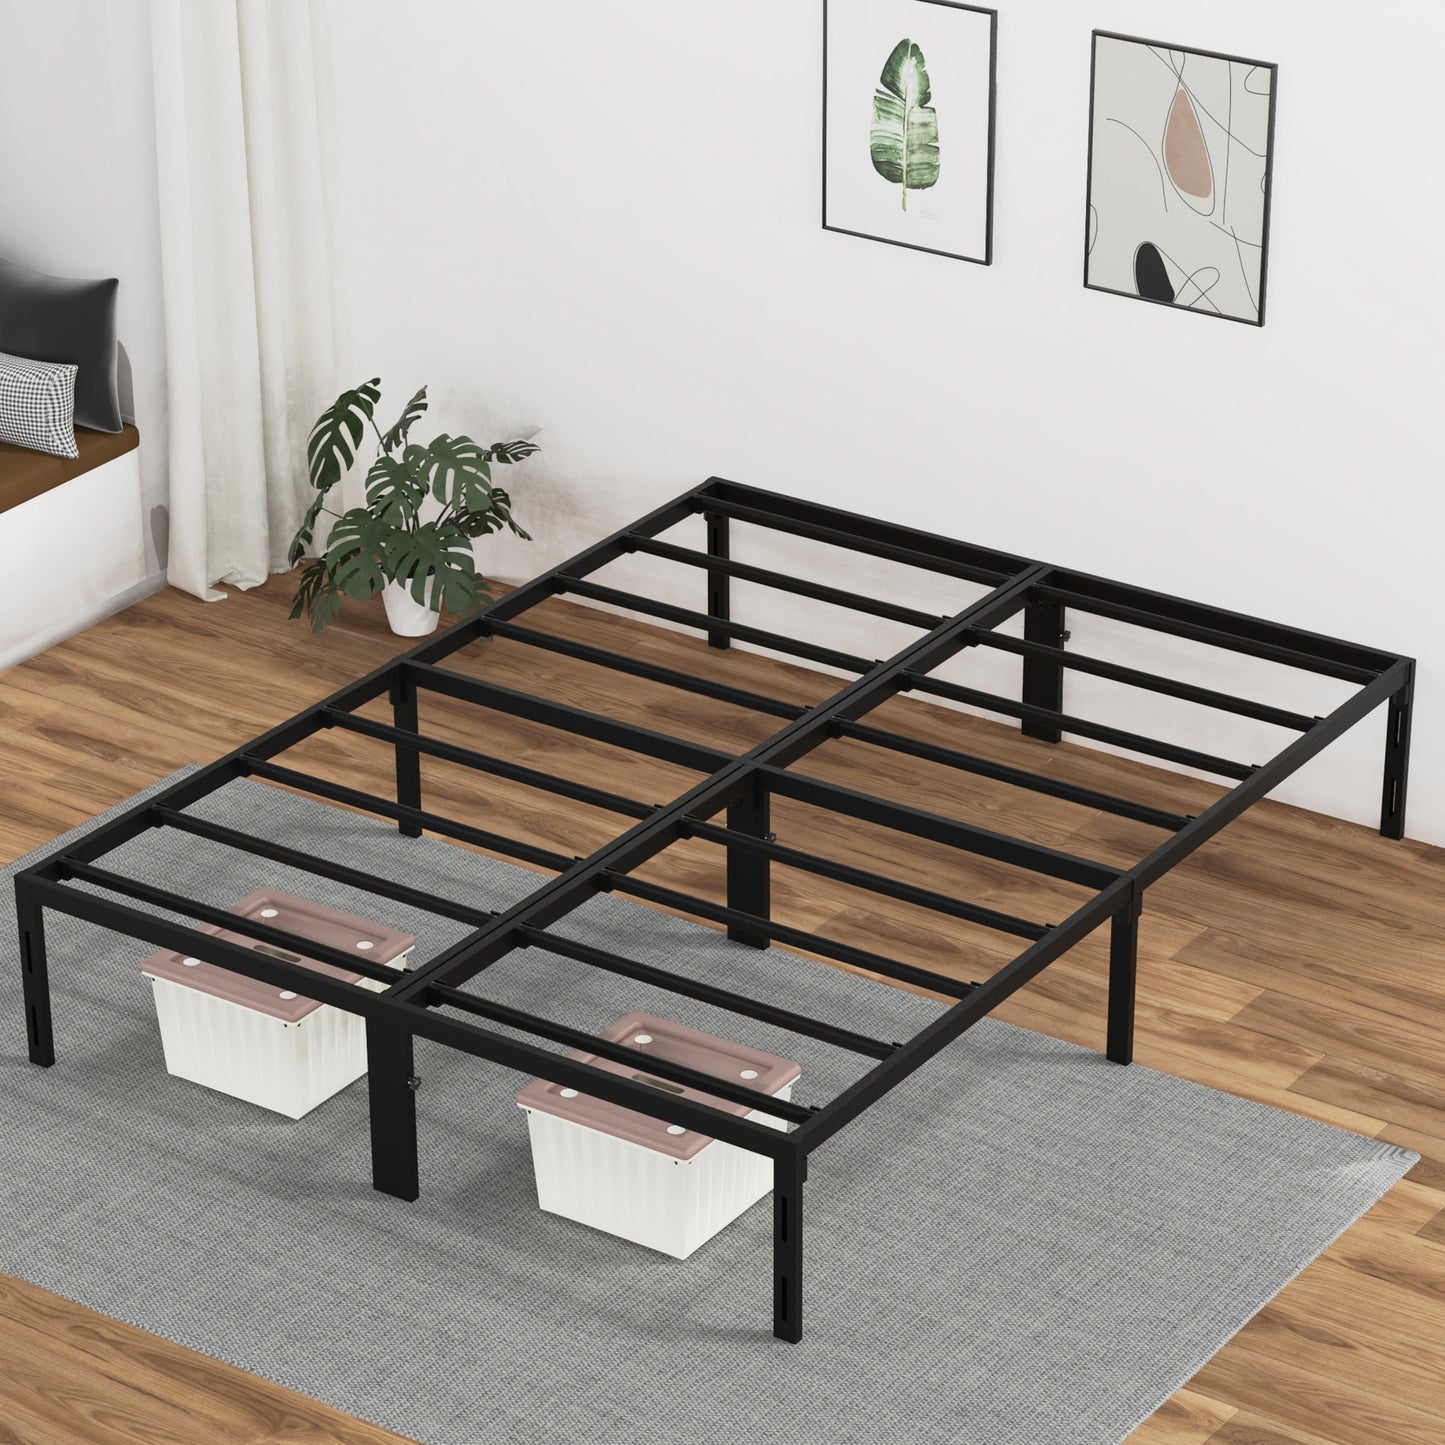 Nefoso Bed Frame, 14 inch Tall Heavy Duty Metal Platform Bed Frame, No Box Spring Needed